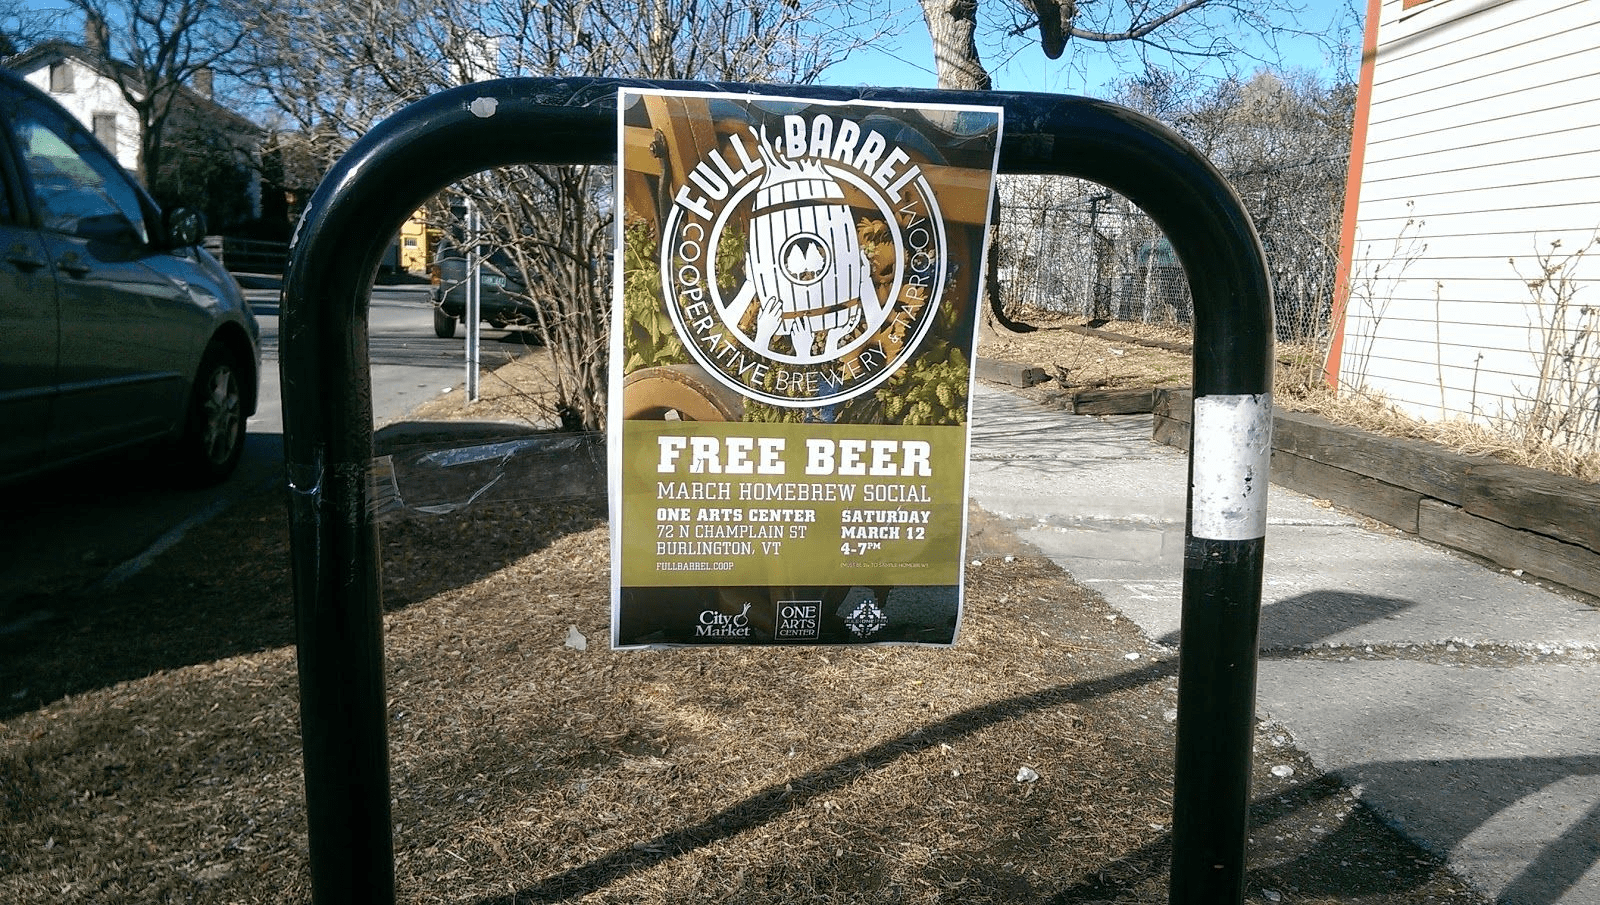 event poster for free beer offered by the Full Barrel co-op